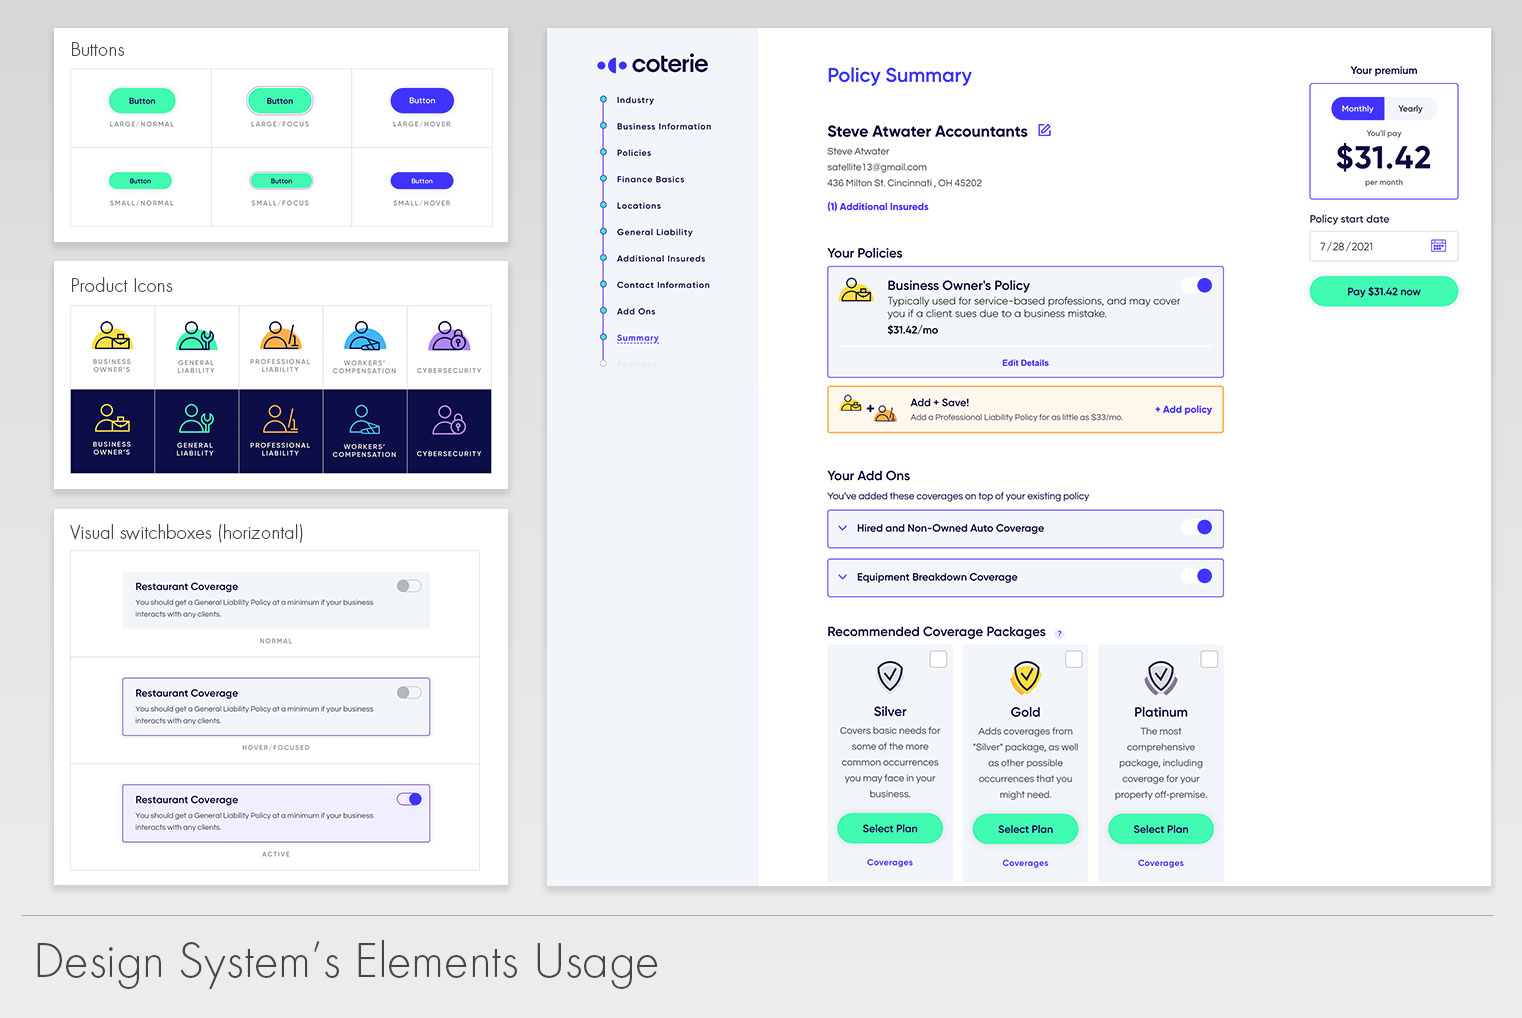 Iterations of the UI